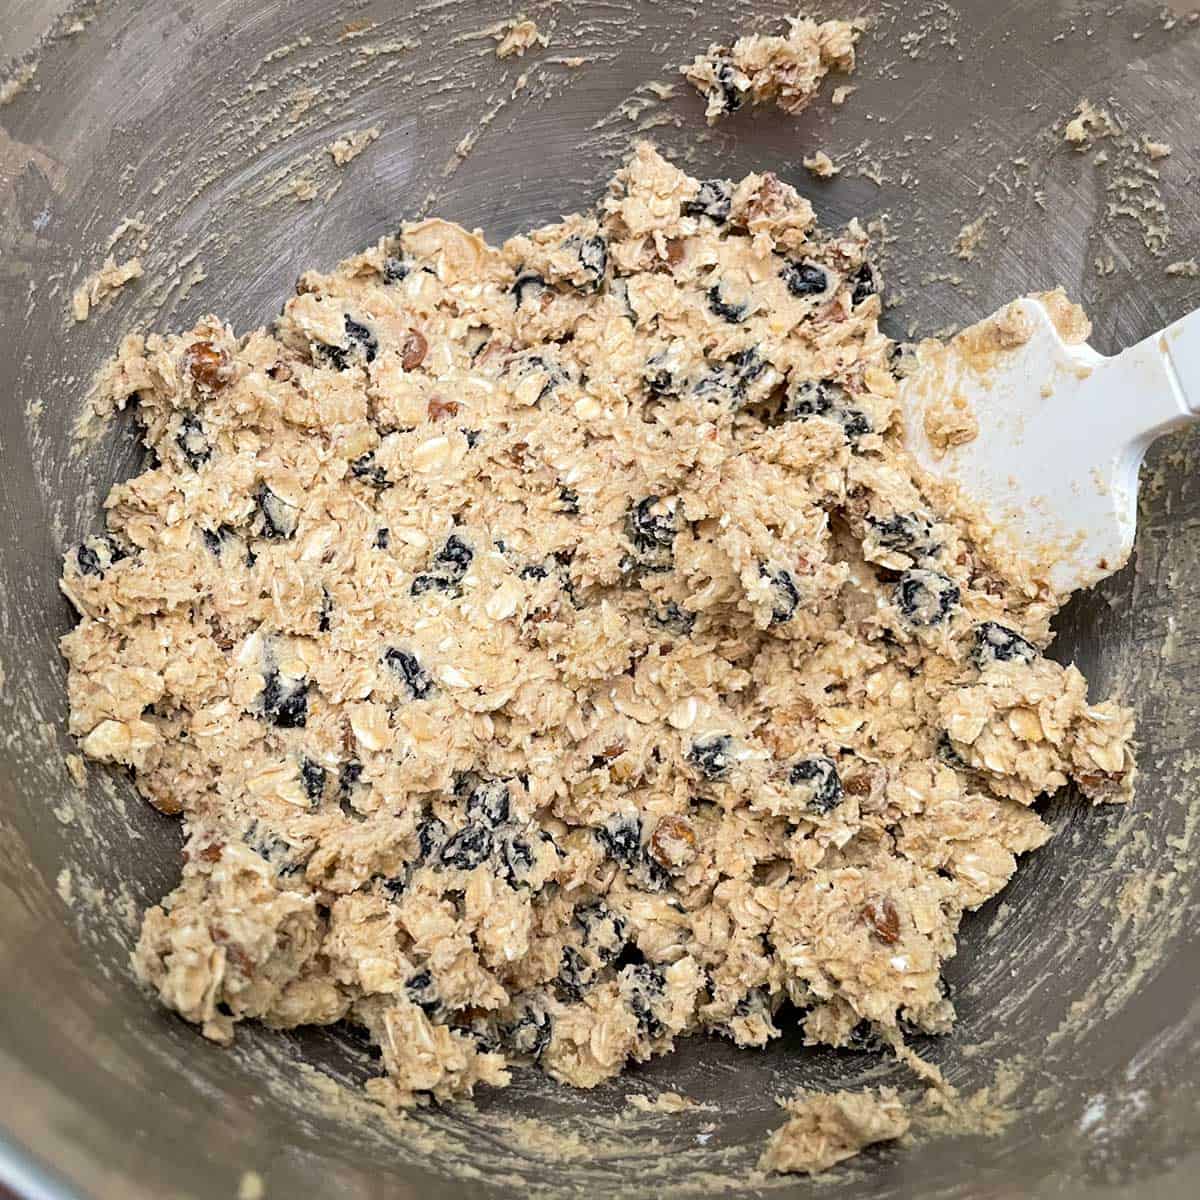 All ingredients mixed in my mixer for my blueberry with walnuts and cinnamon oatmeal cookies.